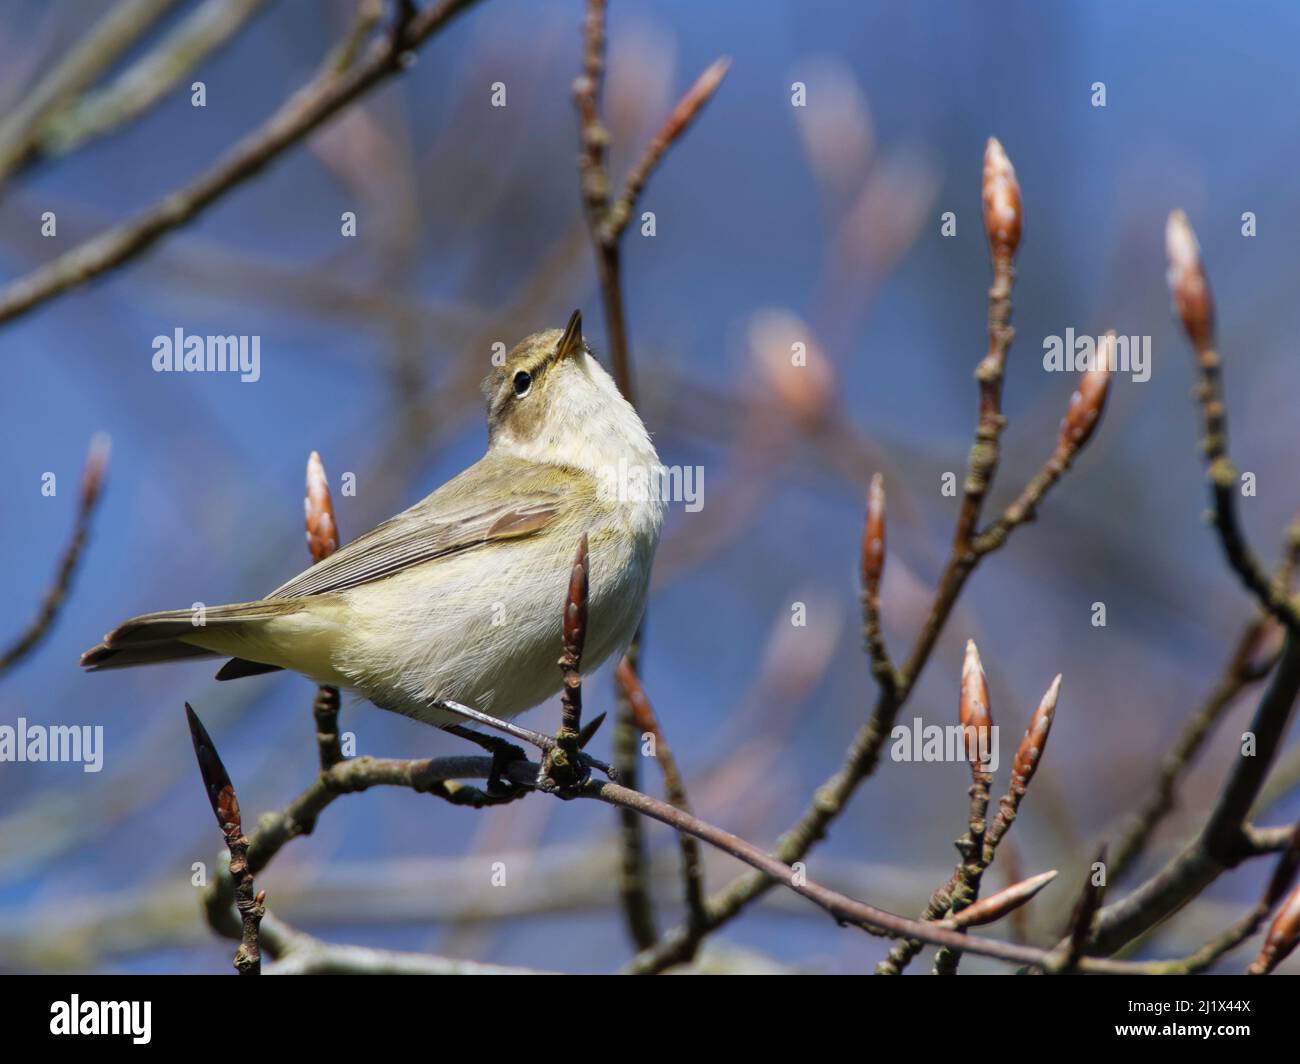 Chiffchaff (Phylloscopus collybita) singing while perched in a Beech tree (Fagus sylvatica) with unopened leaf buds in a garden, Wiltshire, UK, March. Stock Photo